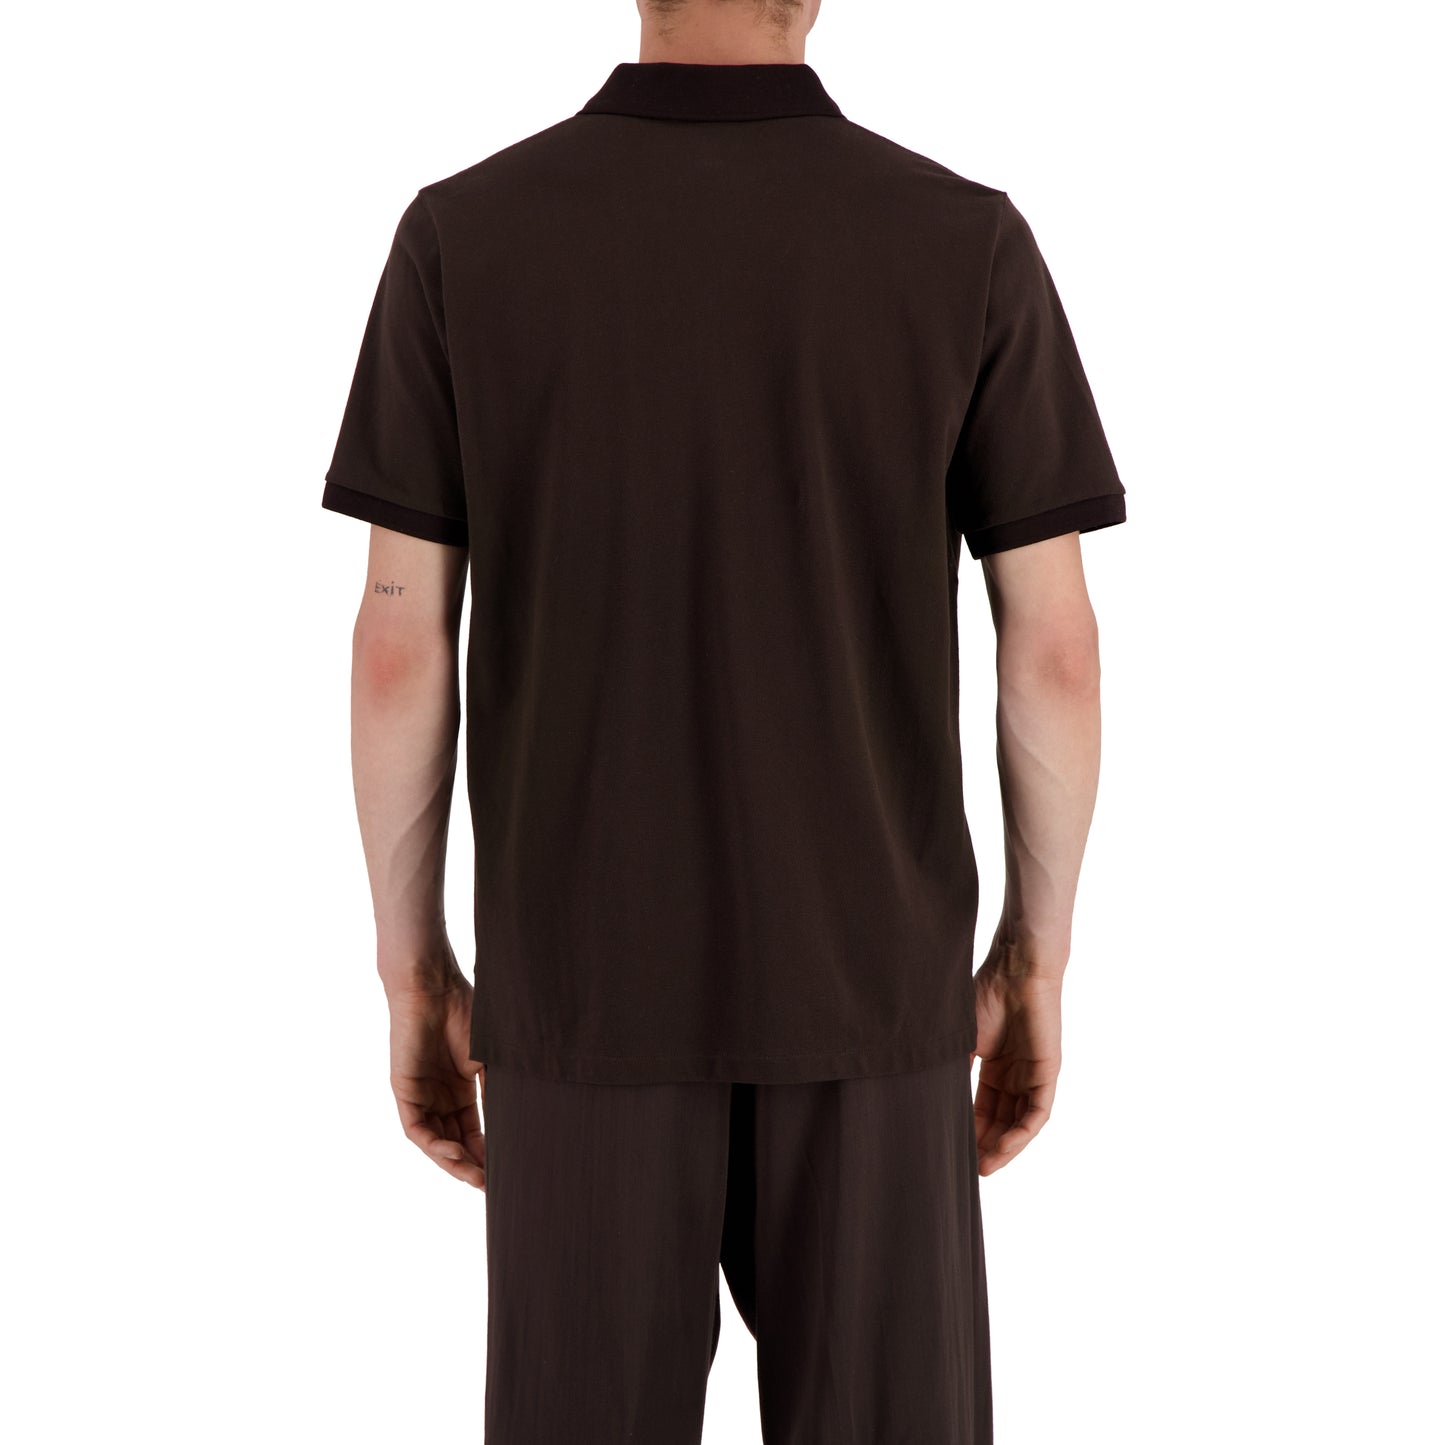 Frank Ss Octopus Embroidery Jersey Cotton Piquet Polo Dark Chocolate Brown